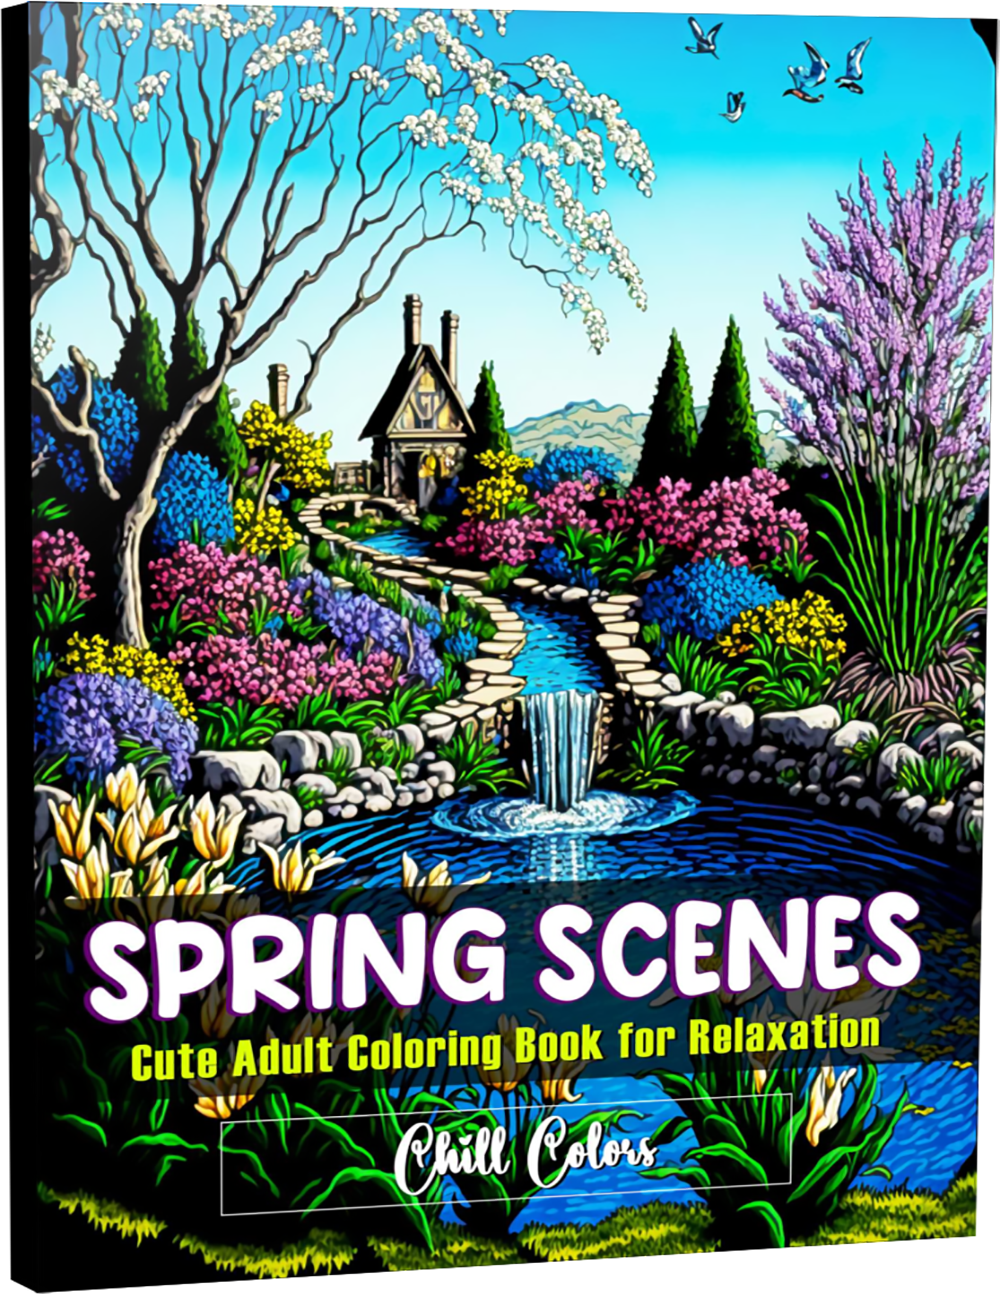 Embracing Tranquility: Unwind with the Cute Spring Scenes Coloring Book, by Grace Thompson